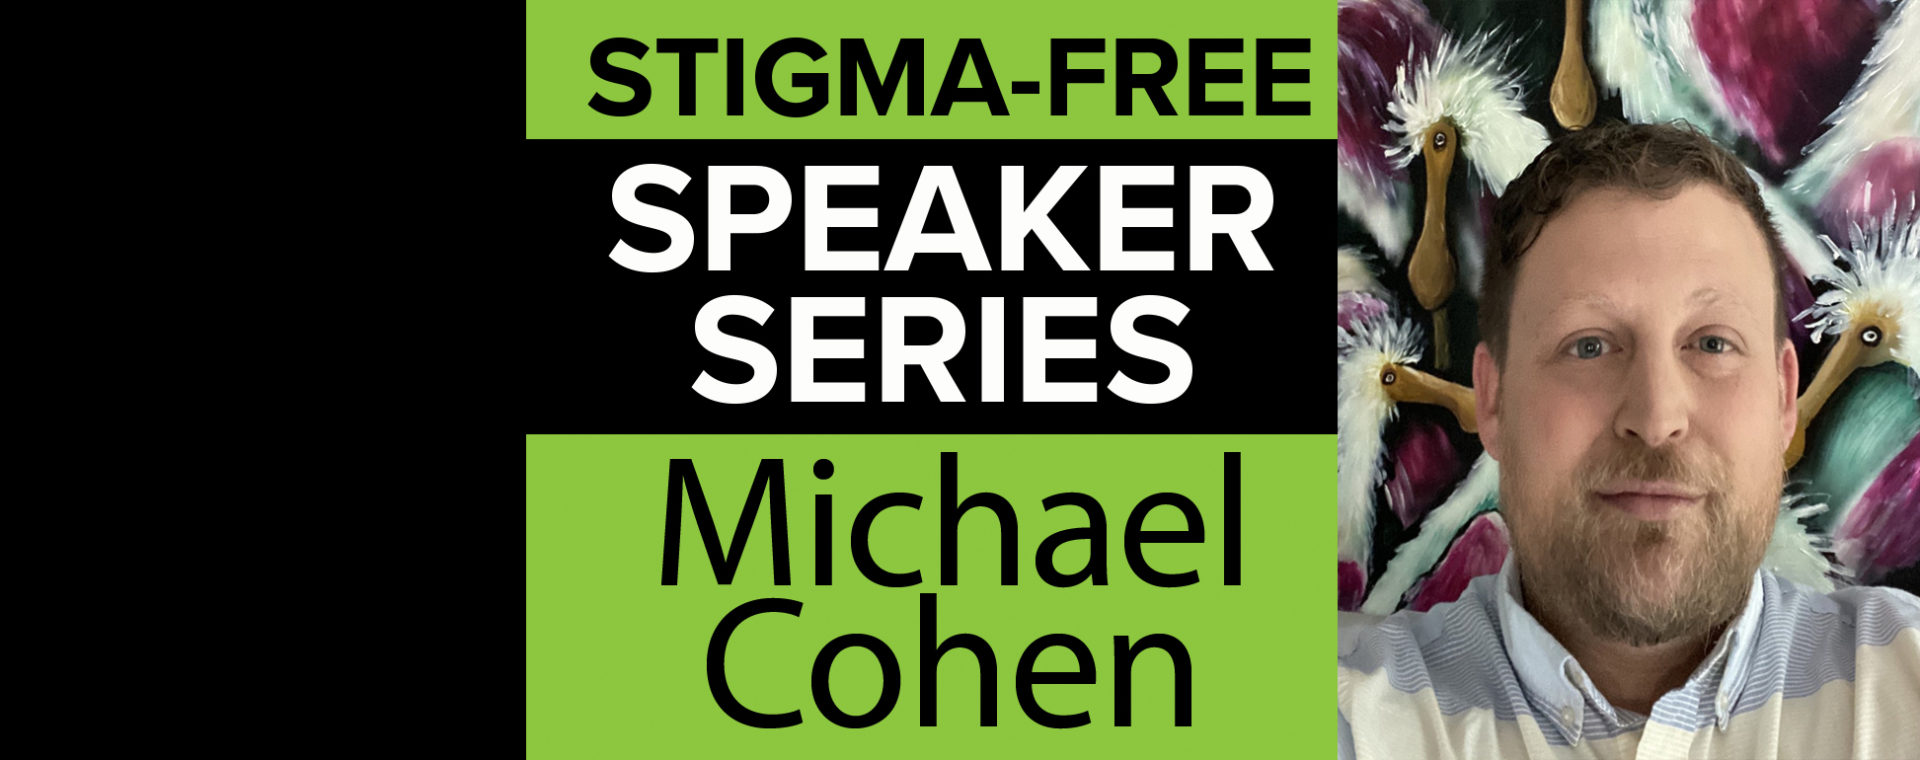 Picture of Dr. Michael Cohen for the event.